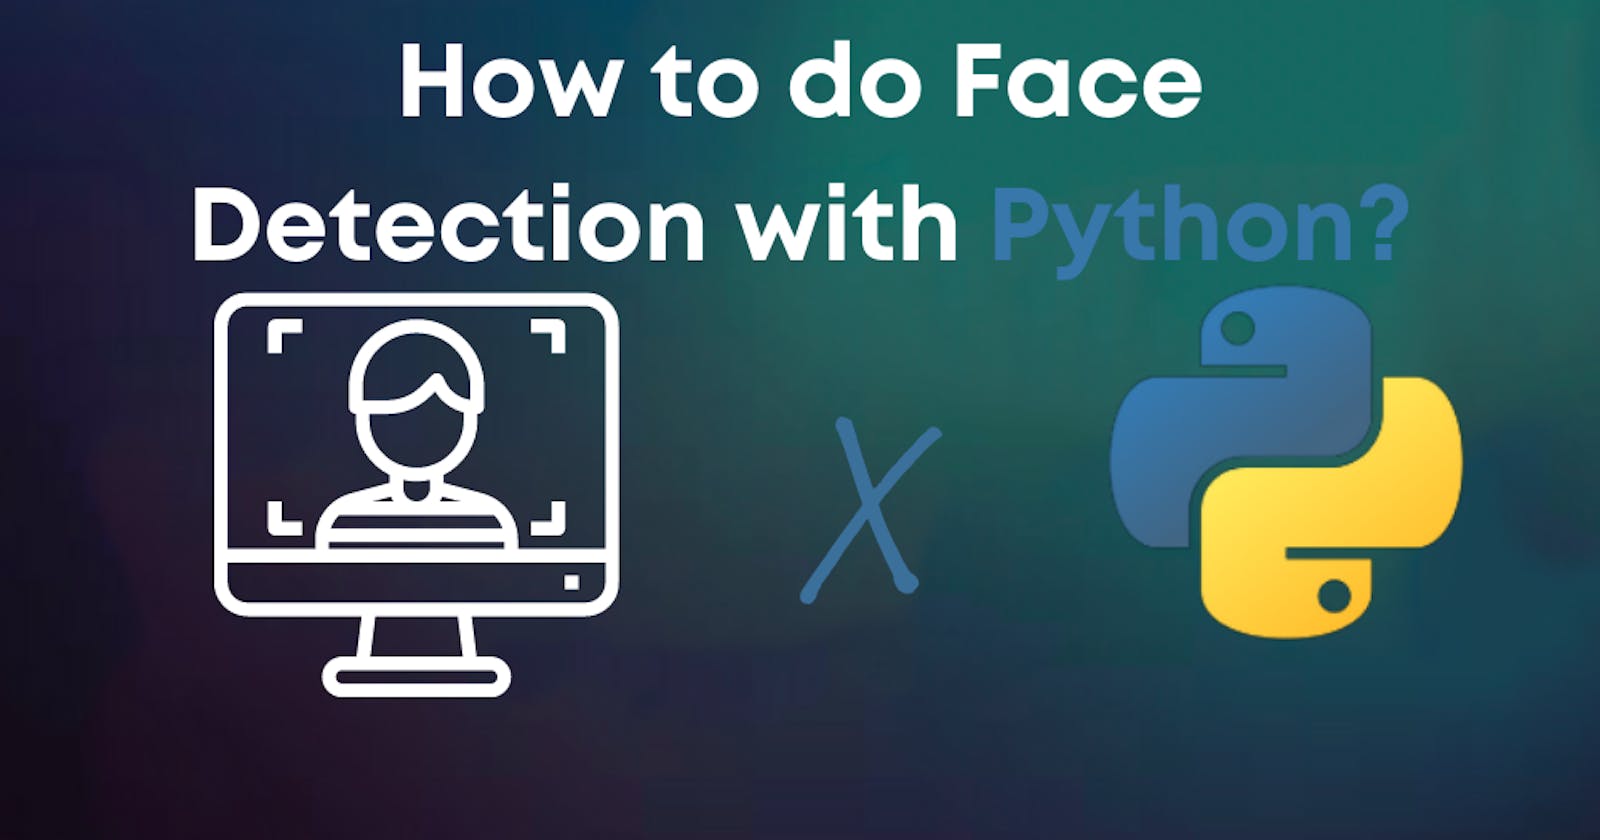 How to do Face Detection with Python?